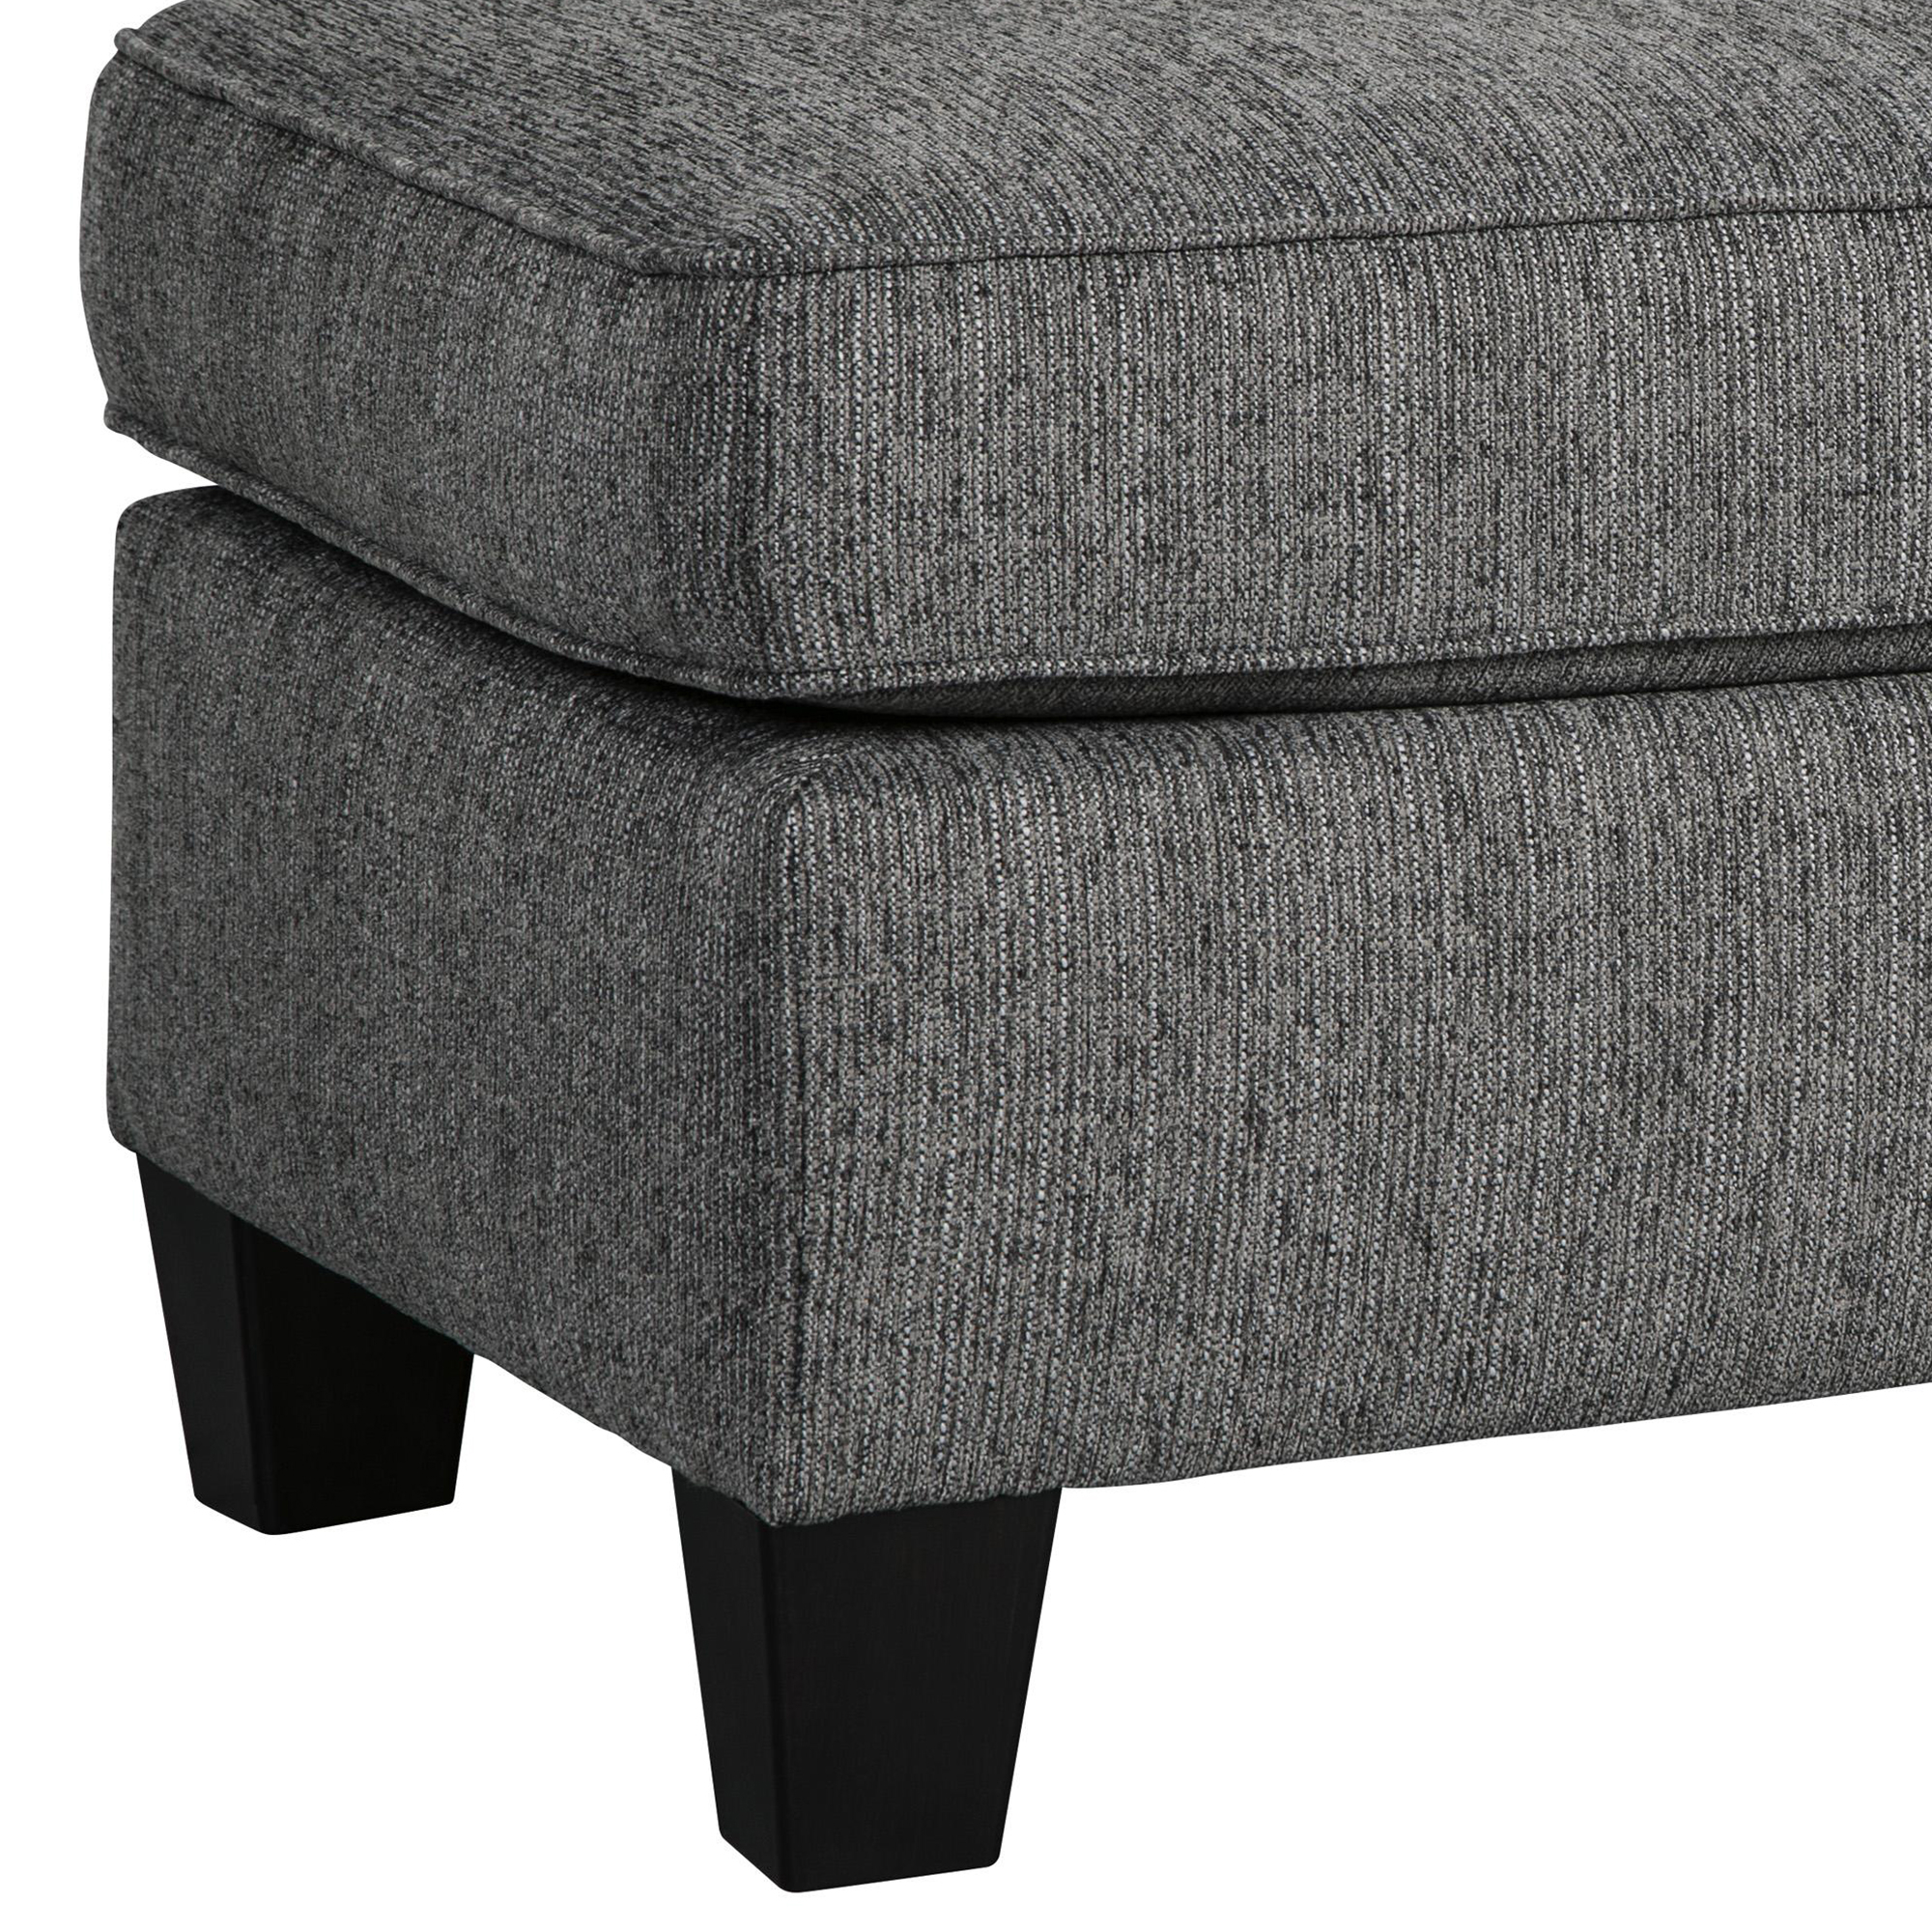 Square Wooden Ottoman With Textured Upholstery And Tapered Legs, Gray- Saltoro Sherpi